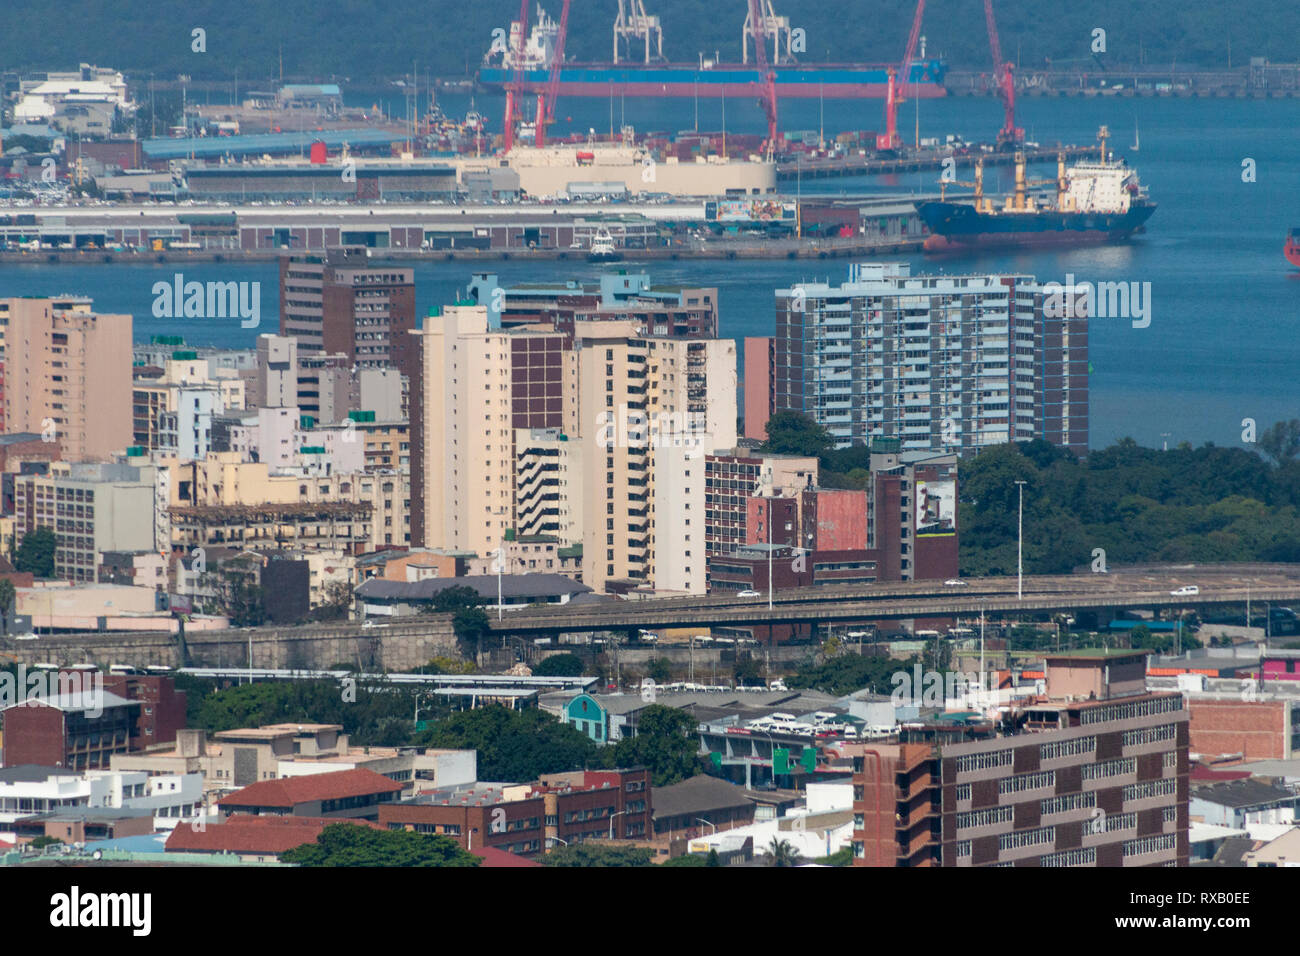 A view of the berea-westridge in Durban in kwa-zulu Natal south africa and the habour in the distance for a fith floor building Stock Photo